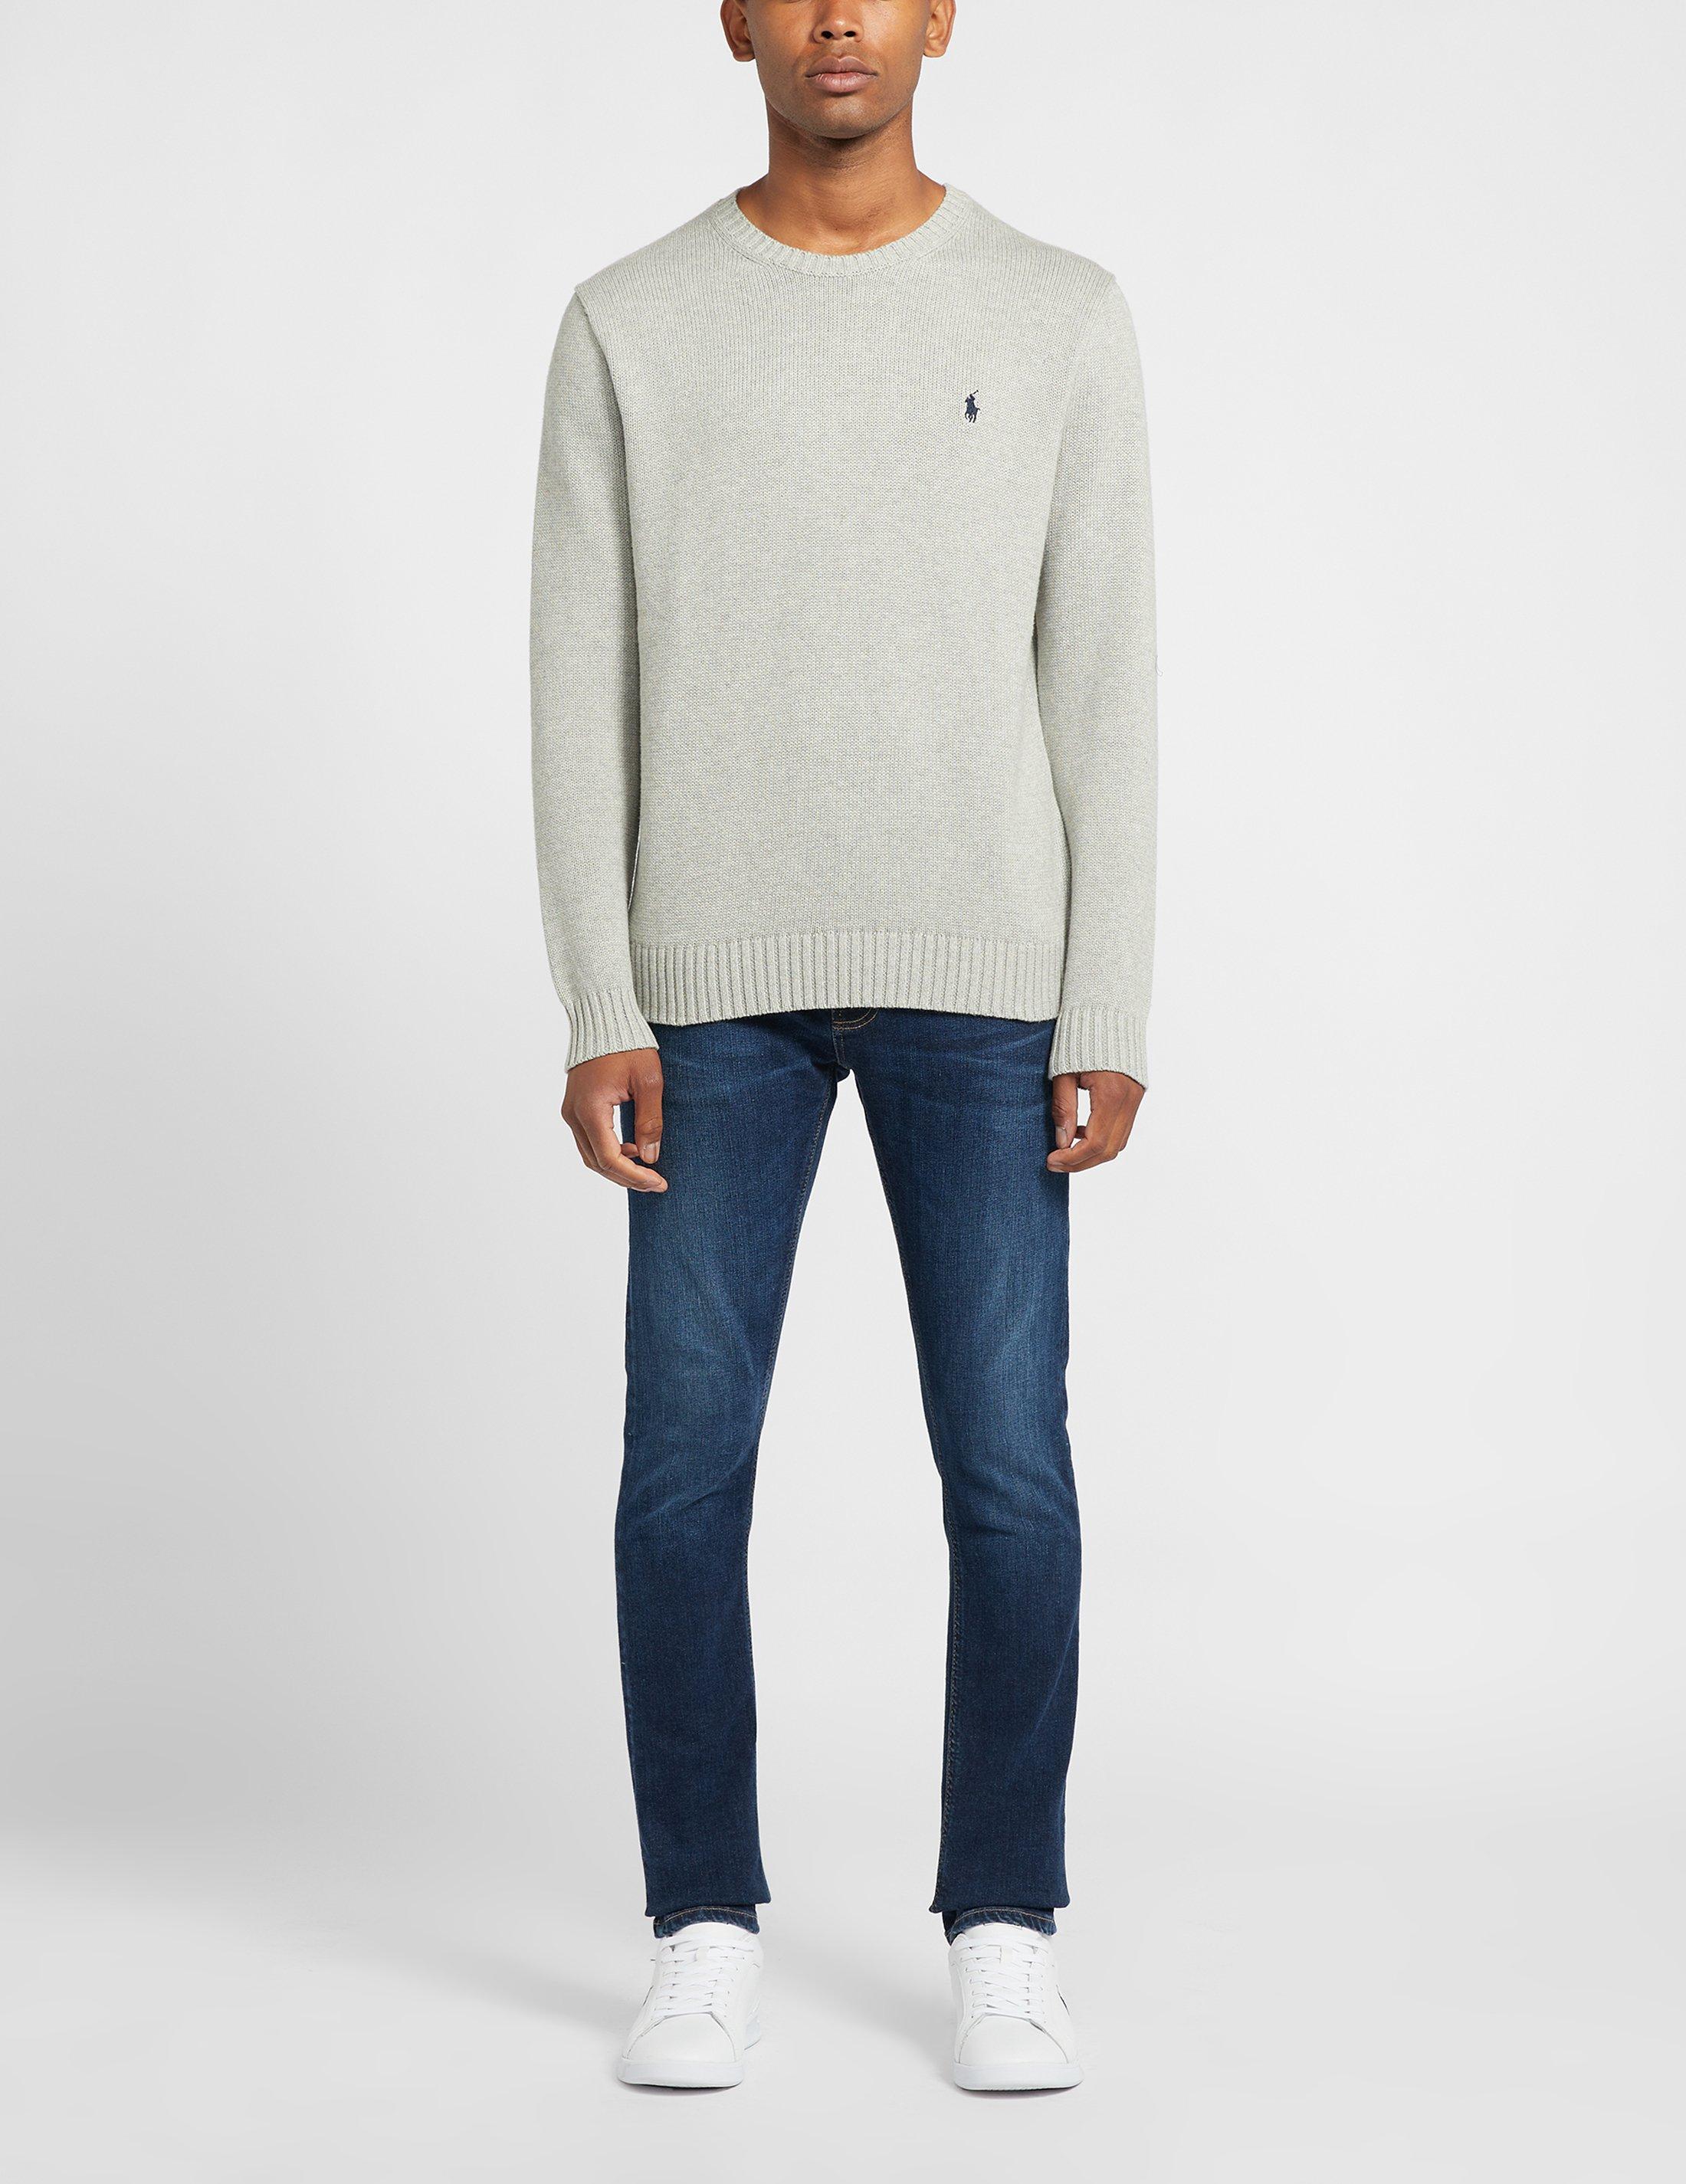 polo knit jumper